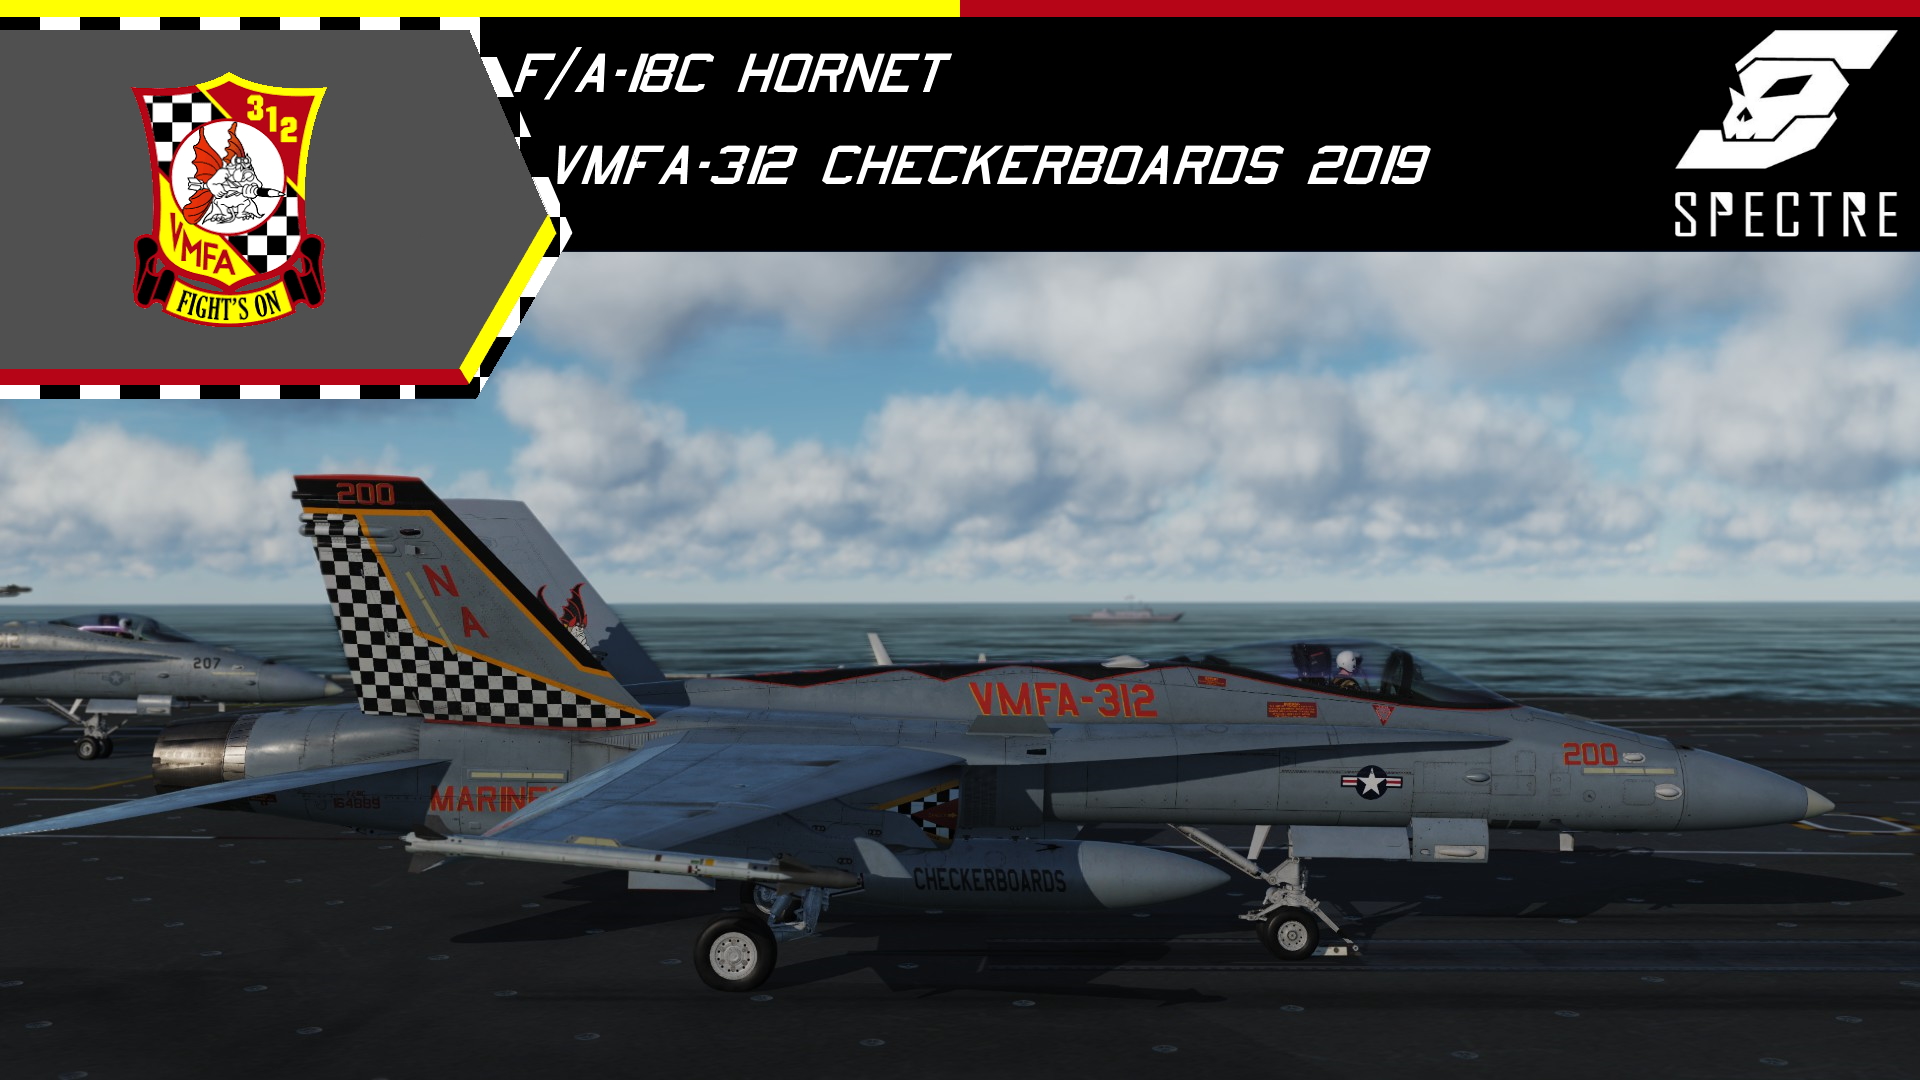 F/A-18C VFMA-312 Checkerboards CAG and high visibility *Updated*